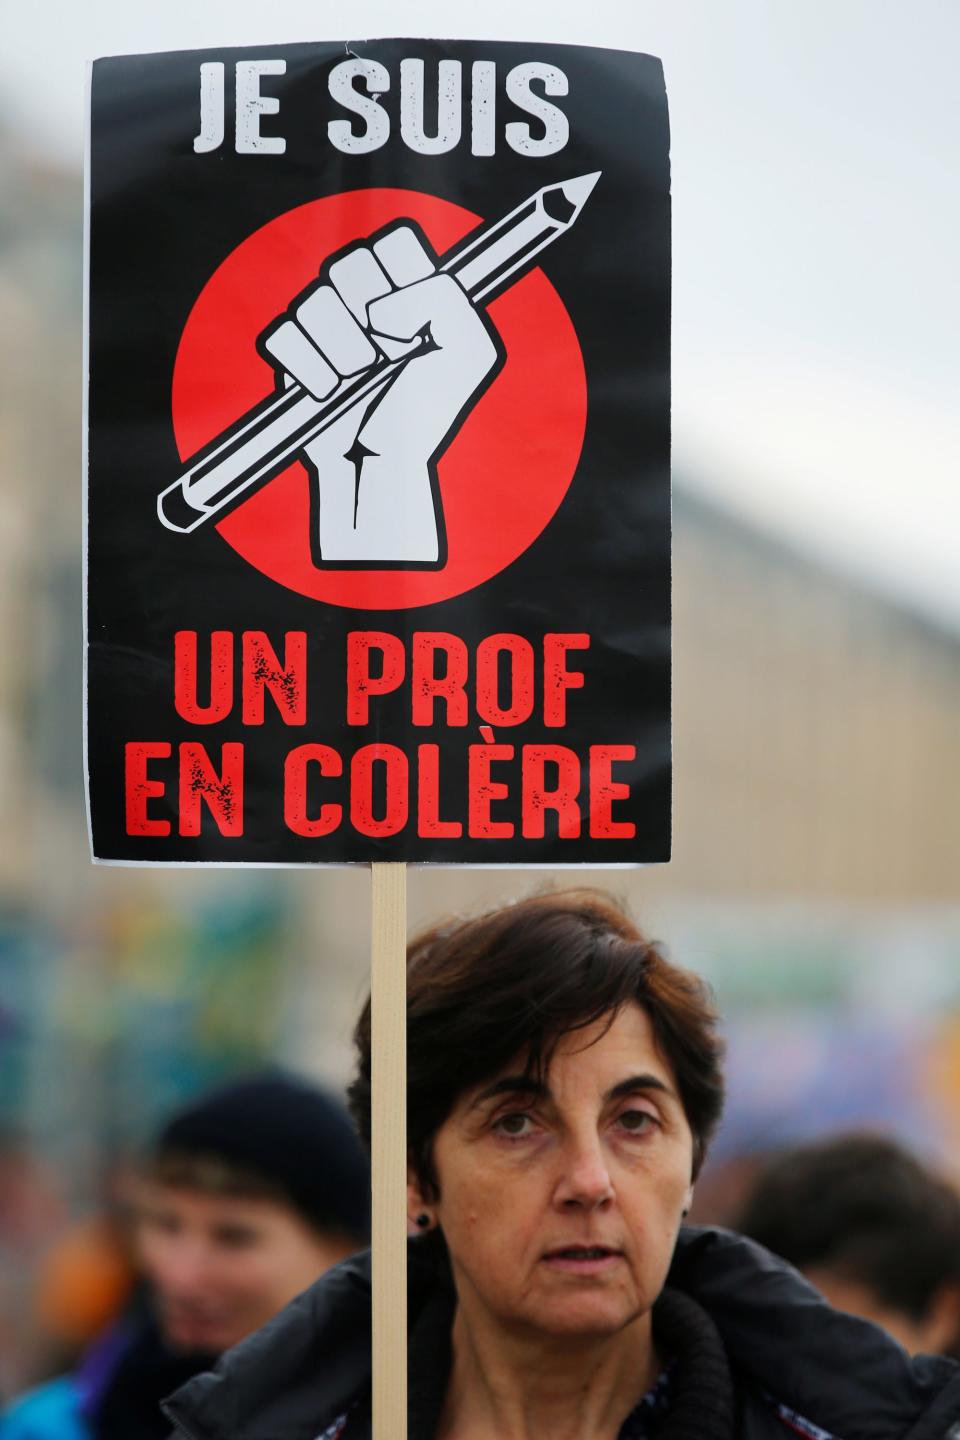 A protester holds a placard as French Labour unions members demonstrate against French government's pensions reform plans in Marseille as part of a day of national strike and protests in France, December 5, 2019.